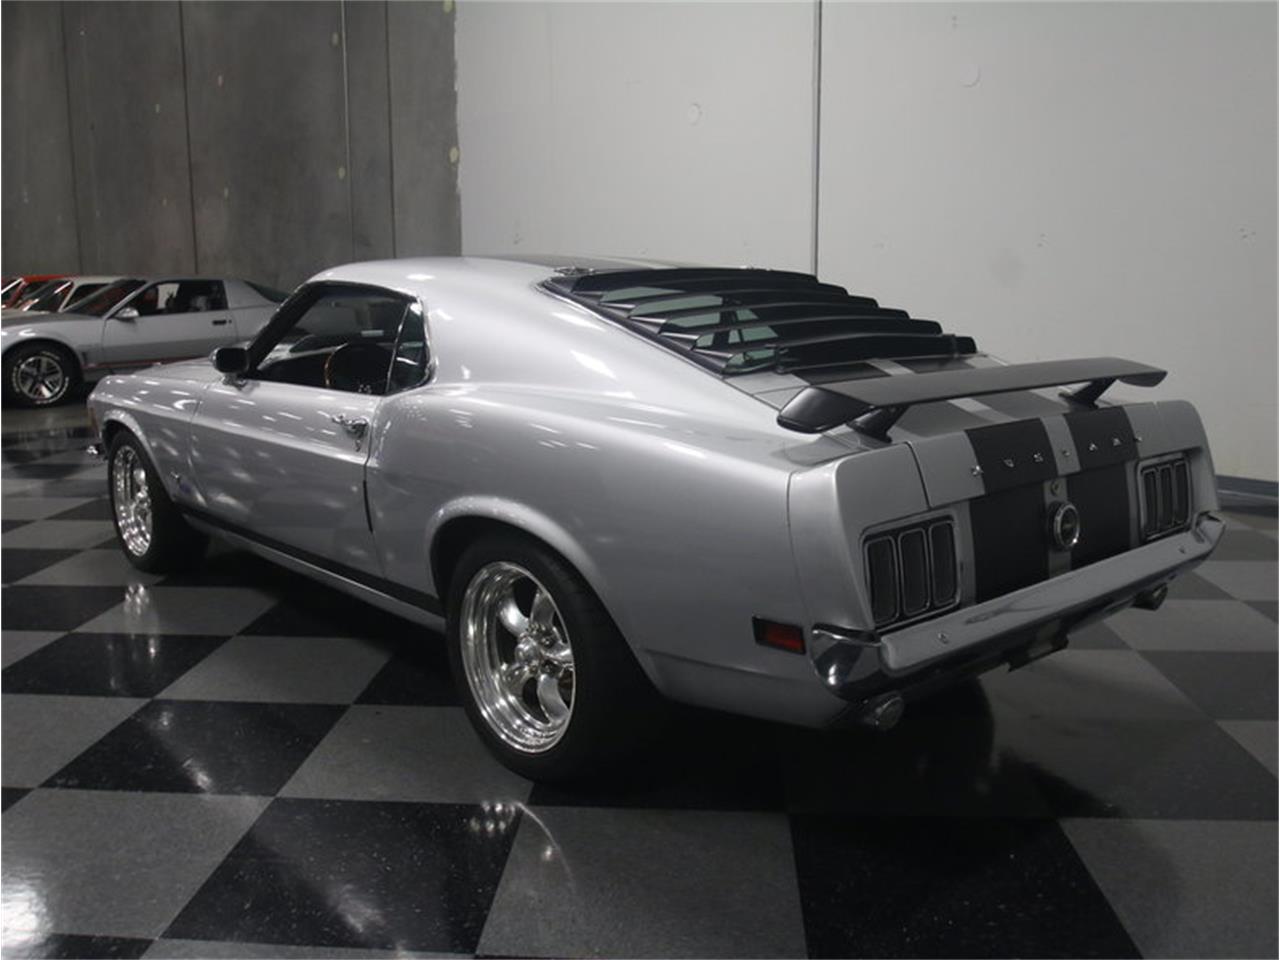 1970 Ford Mustang Fastback Restomod for Sale | ClassicCars.com | CC-988205